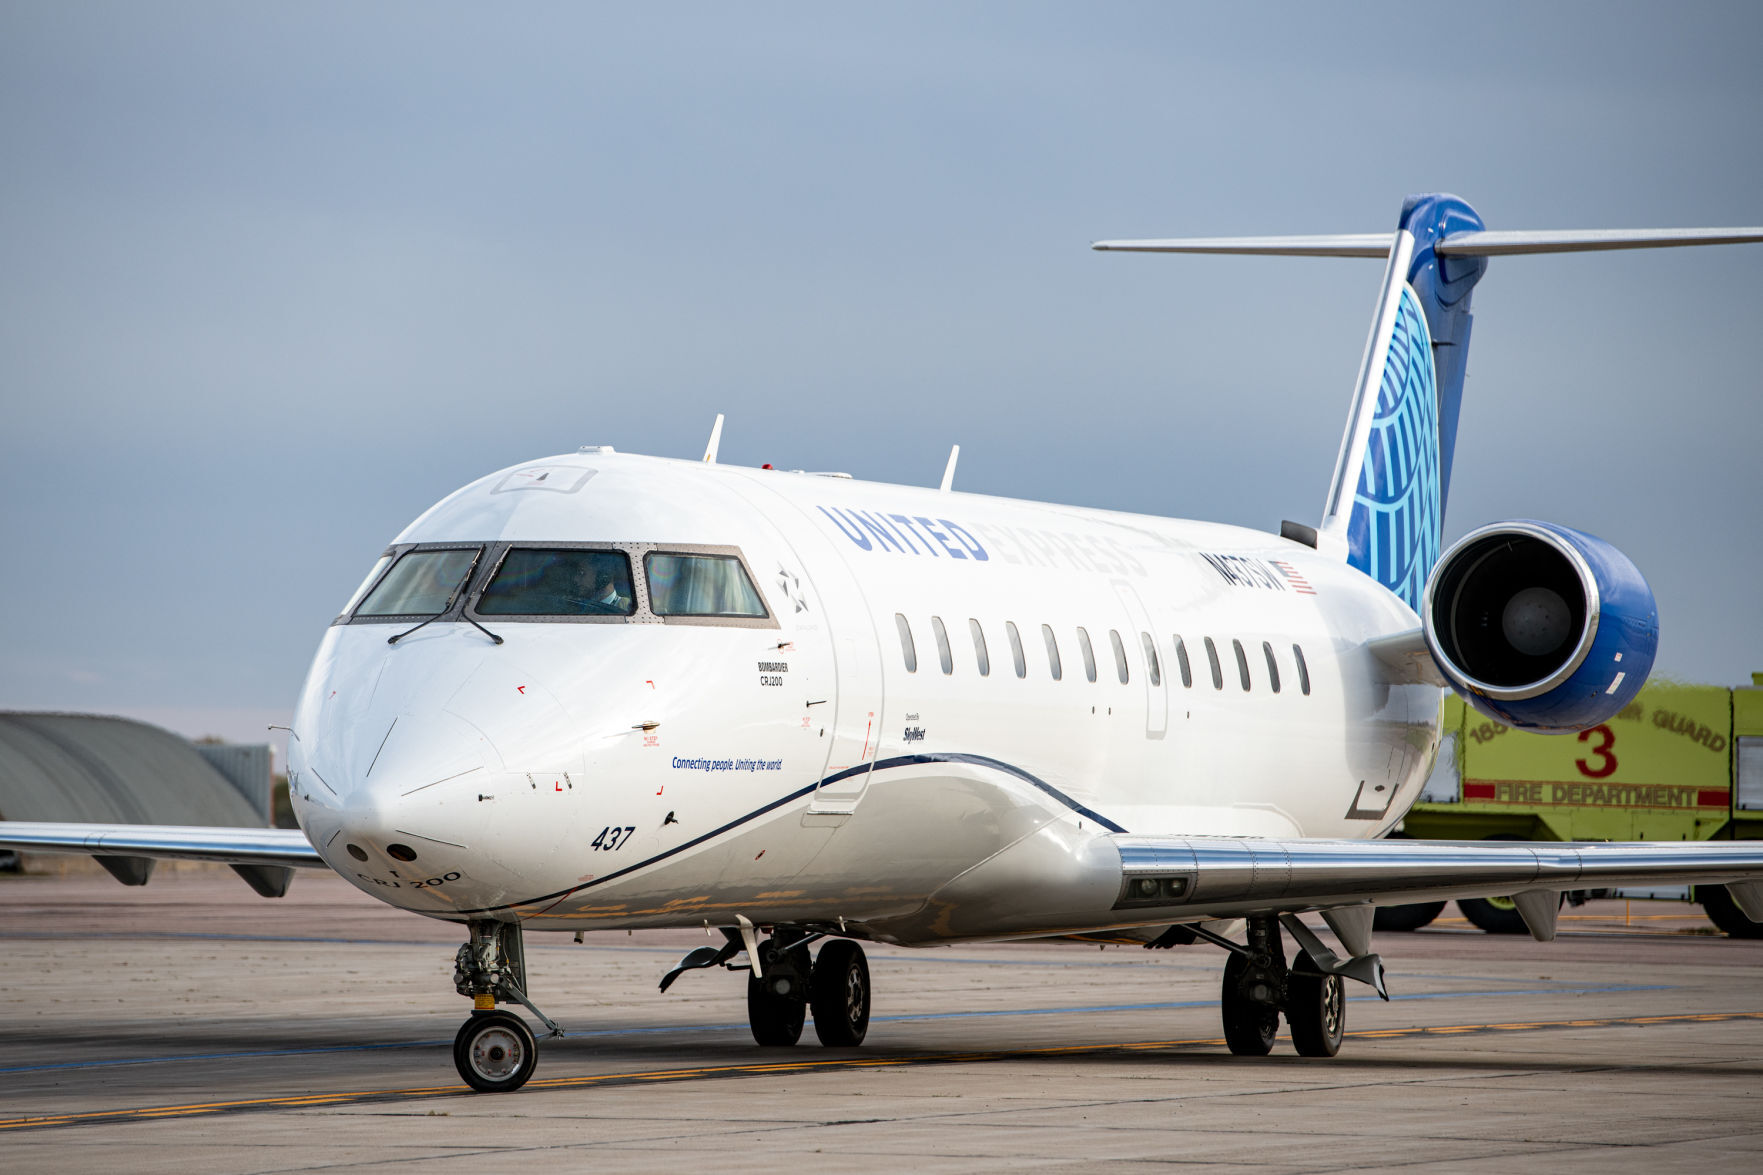 sioux city airport flights